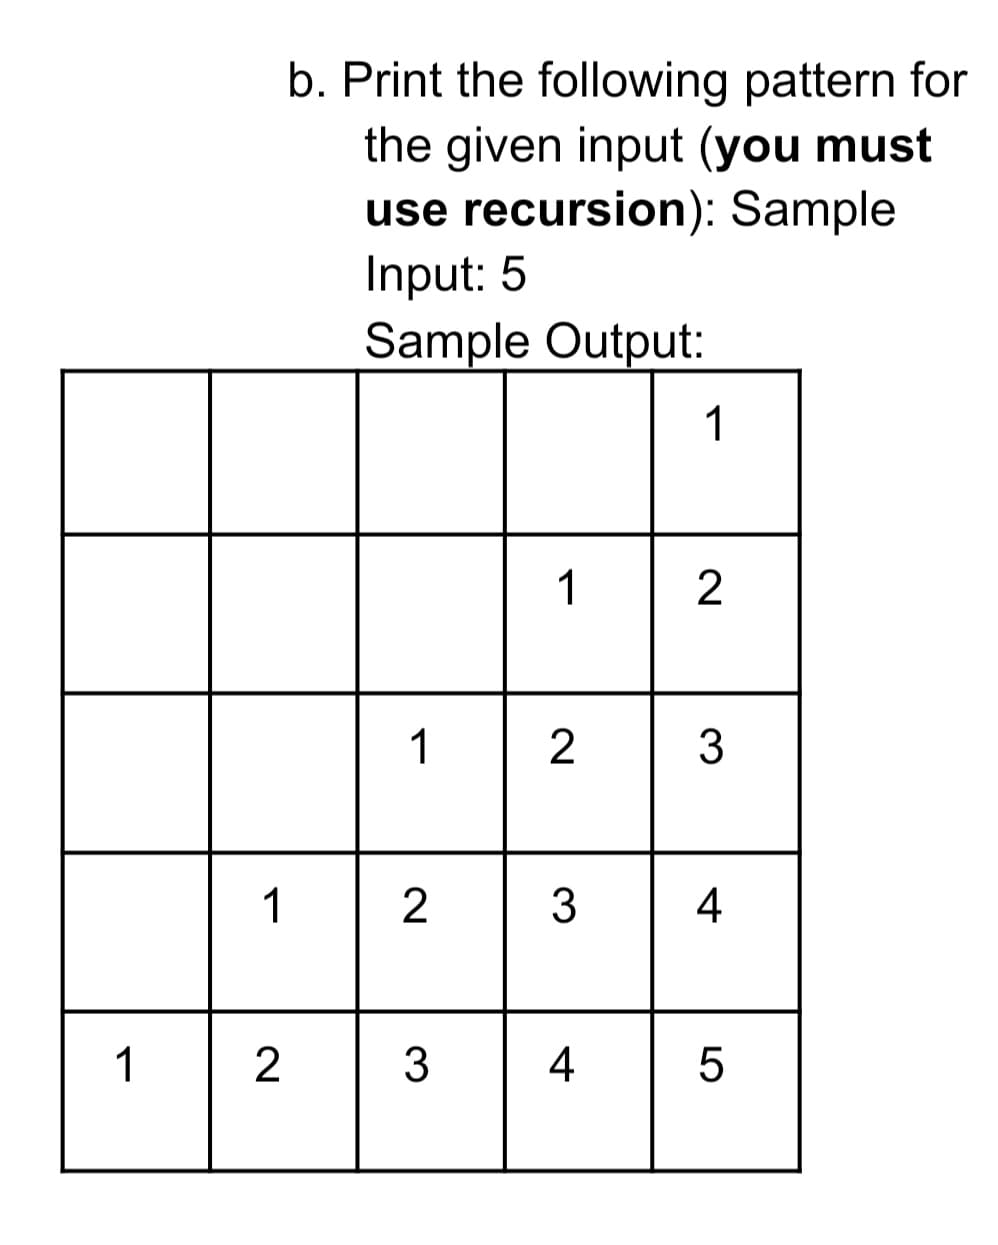 b. Print the following pattern for
the given input (you must
use recursion): Sample
Input: 5
Sample Output:
1
1
2
1
2
3
1
4
1
3
4
LO
